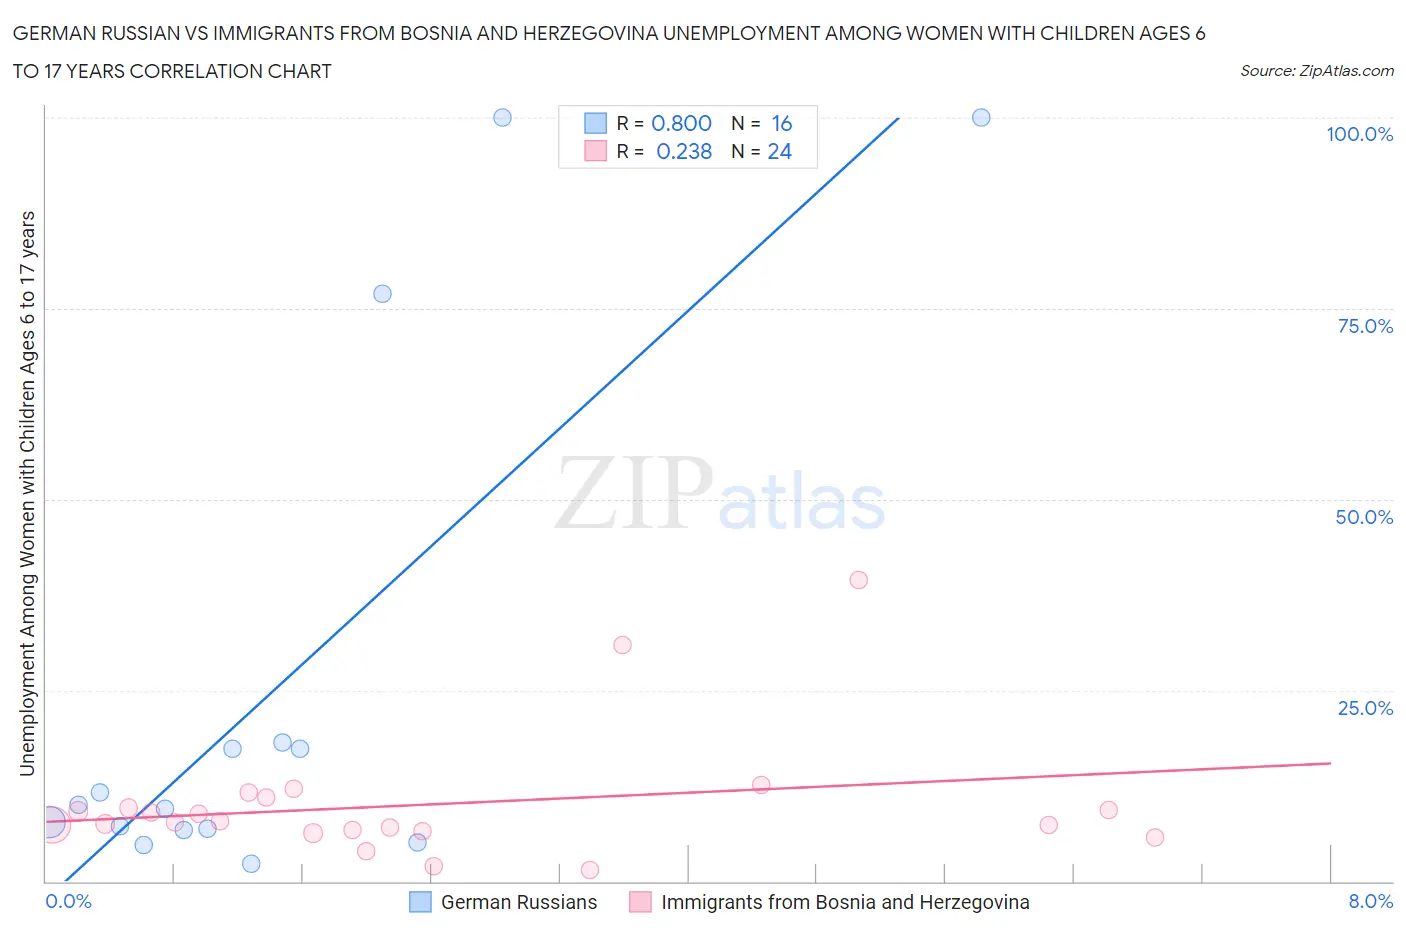 German Russian vs Immigrants from Bosnia and Herzegovina Unemployment Among Women with Children Ages 6 to 17 years